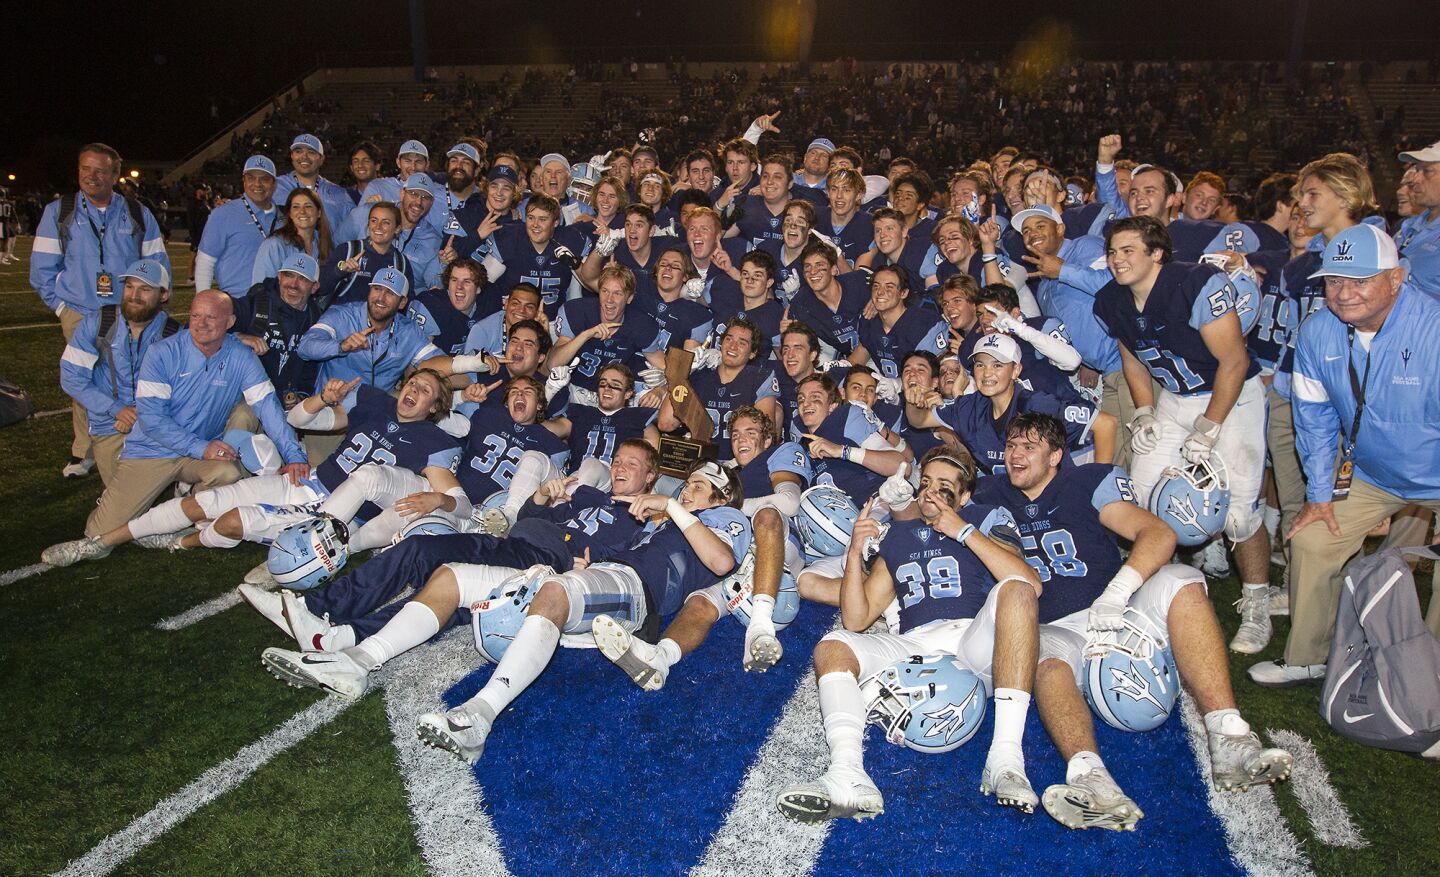 The Corona del Mar football team celebrates after defeating Serra 35-27 in the CIF State Division 1-A title game at Cerritos College on Saturday.